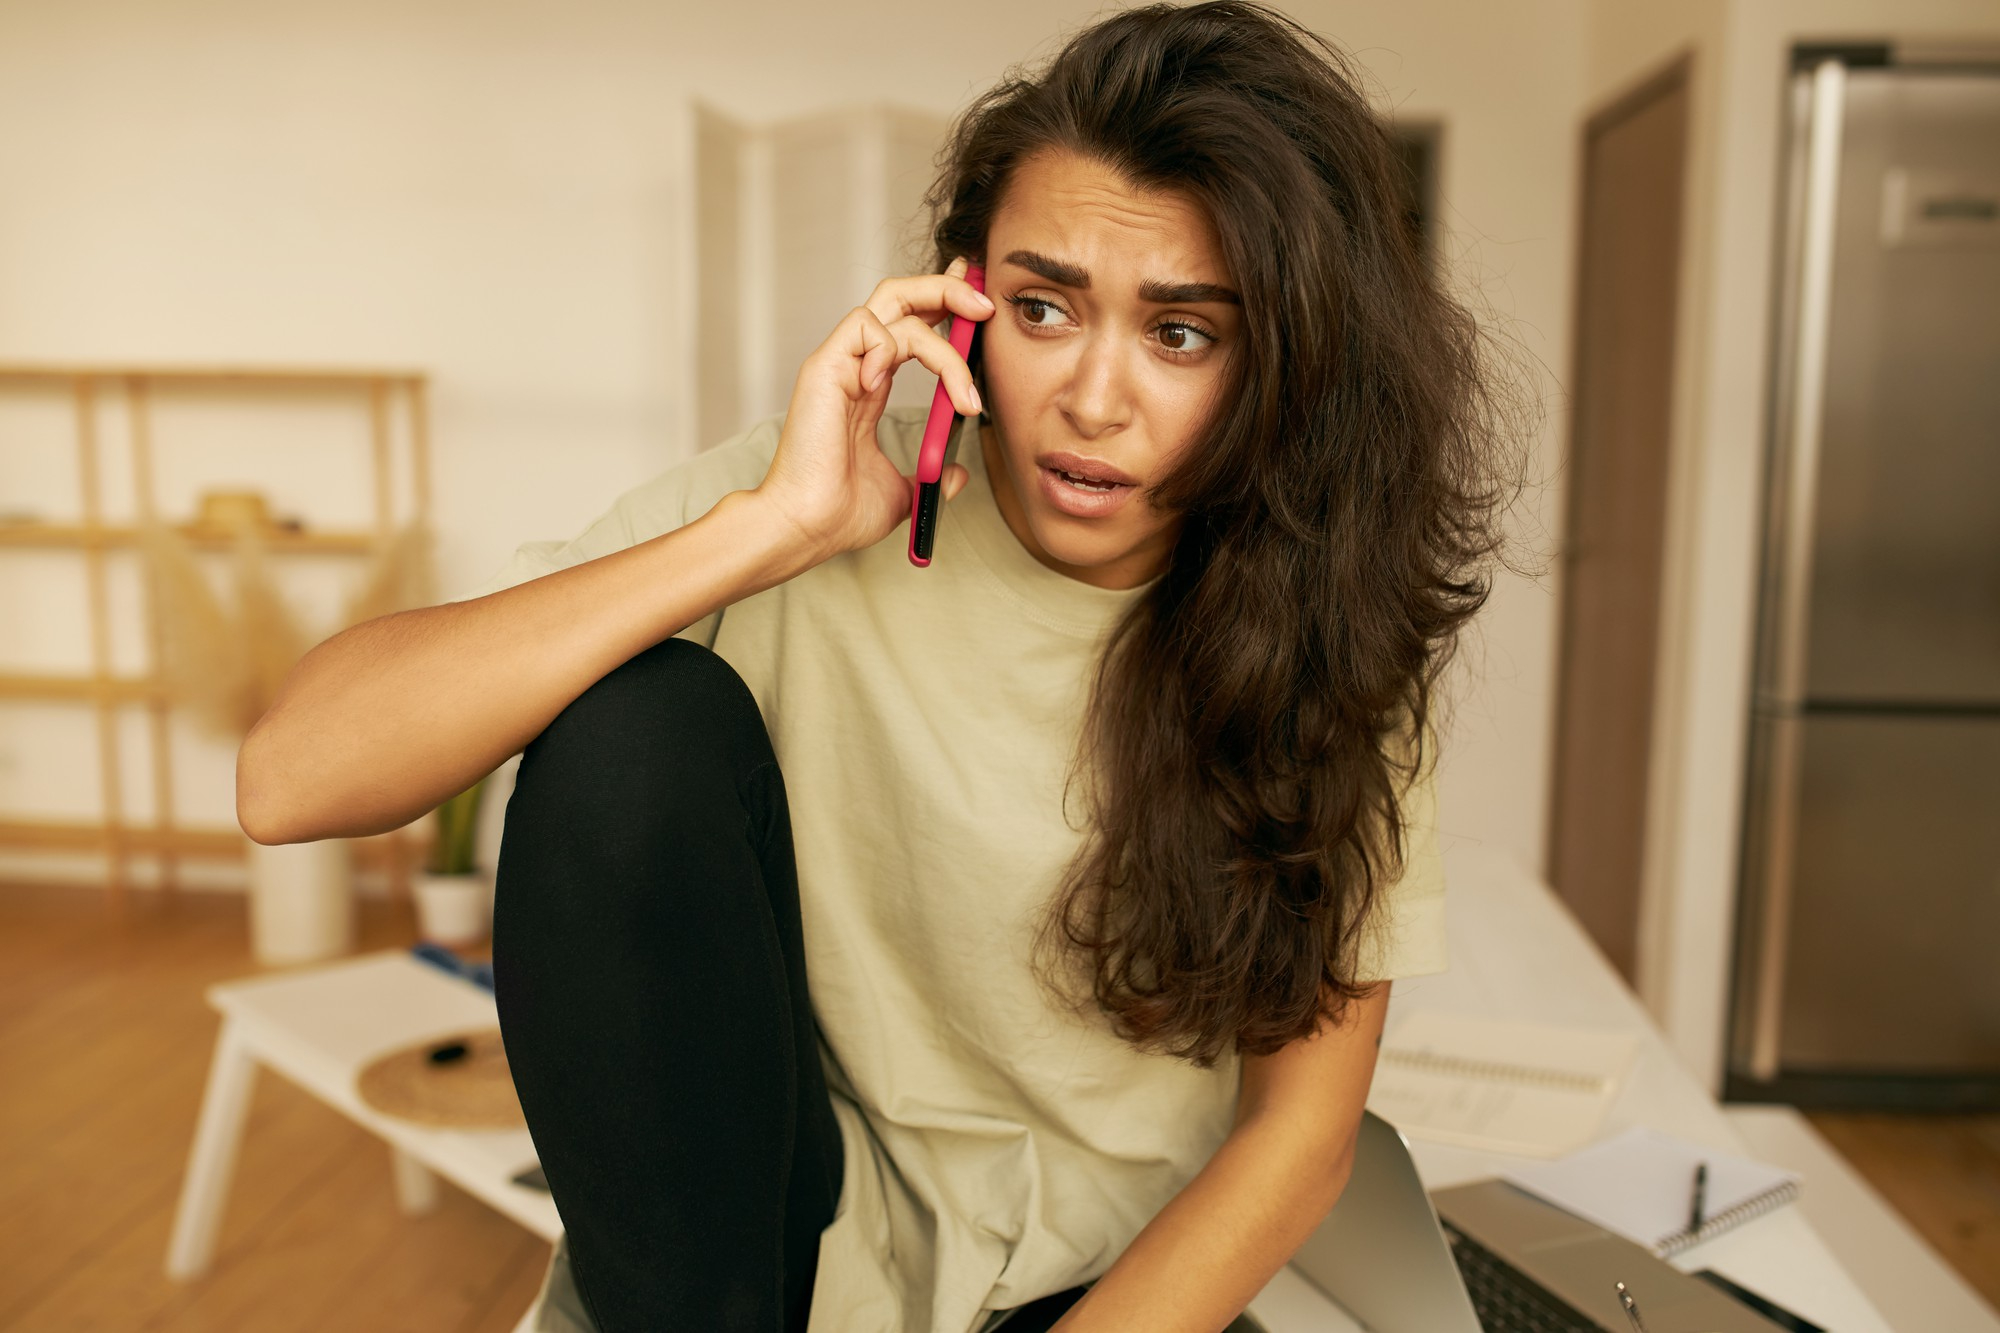 A woman looking surprised while talking on the phone | Source: Freepik